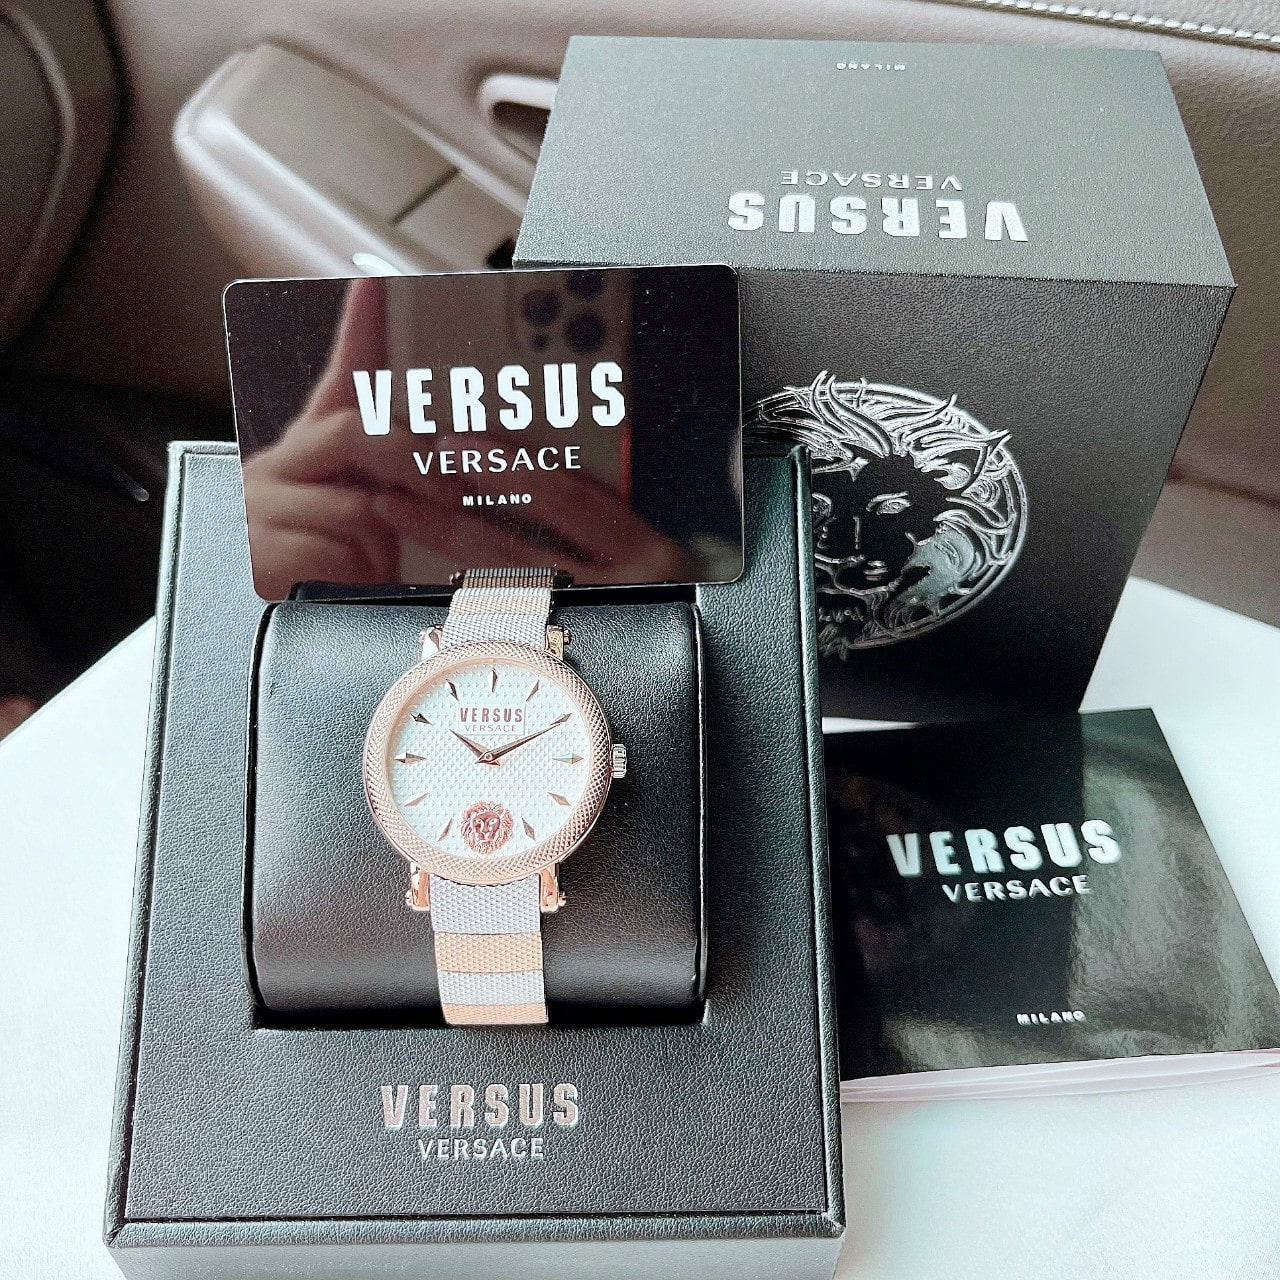 ĐỒNG HỒ NỮ DÂY KIM LOẠI VERSUS BY VERSACE WEHO TWO TONE STAINLESS STEEL BRACELET 5